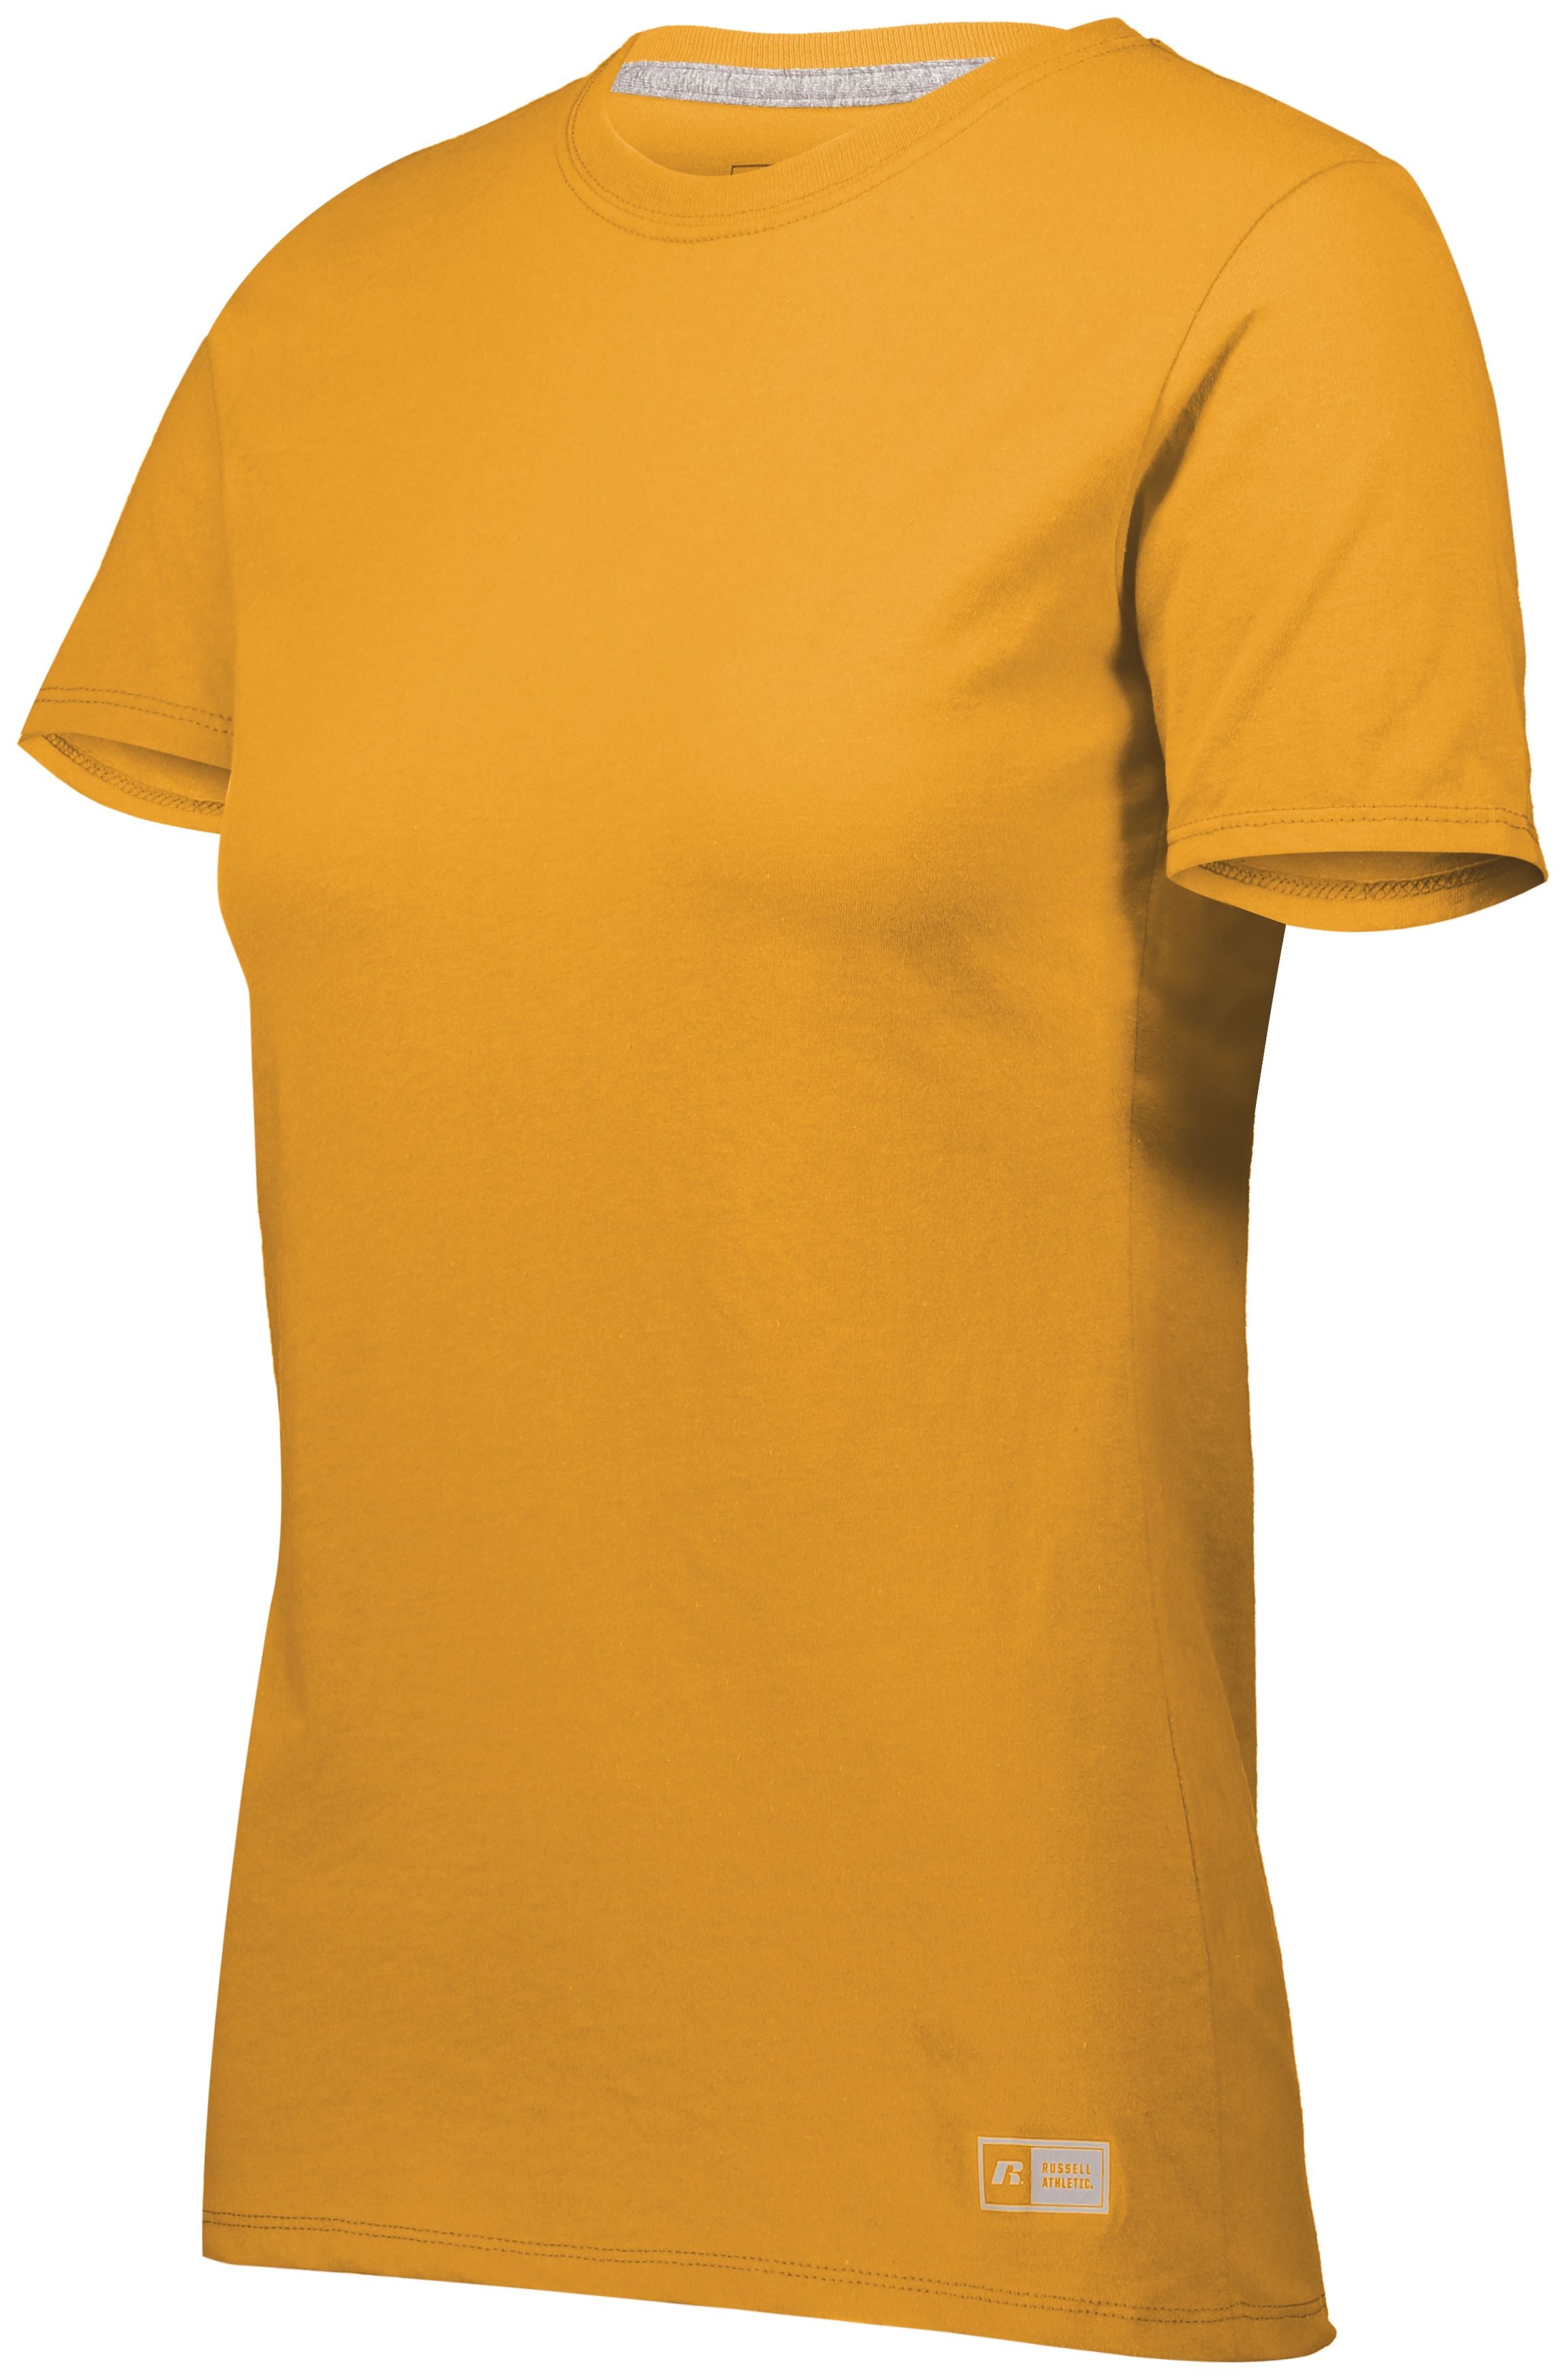 Russell Athletic Ladies Essential Tee in Gold  -Part of the Ladies, Ladies-Tee-Shirt, T-Shirts, Russell-Athletic-Products, Shirts product lines at KanaleyCreations.com